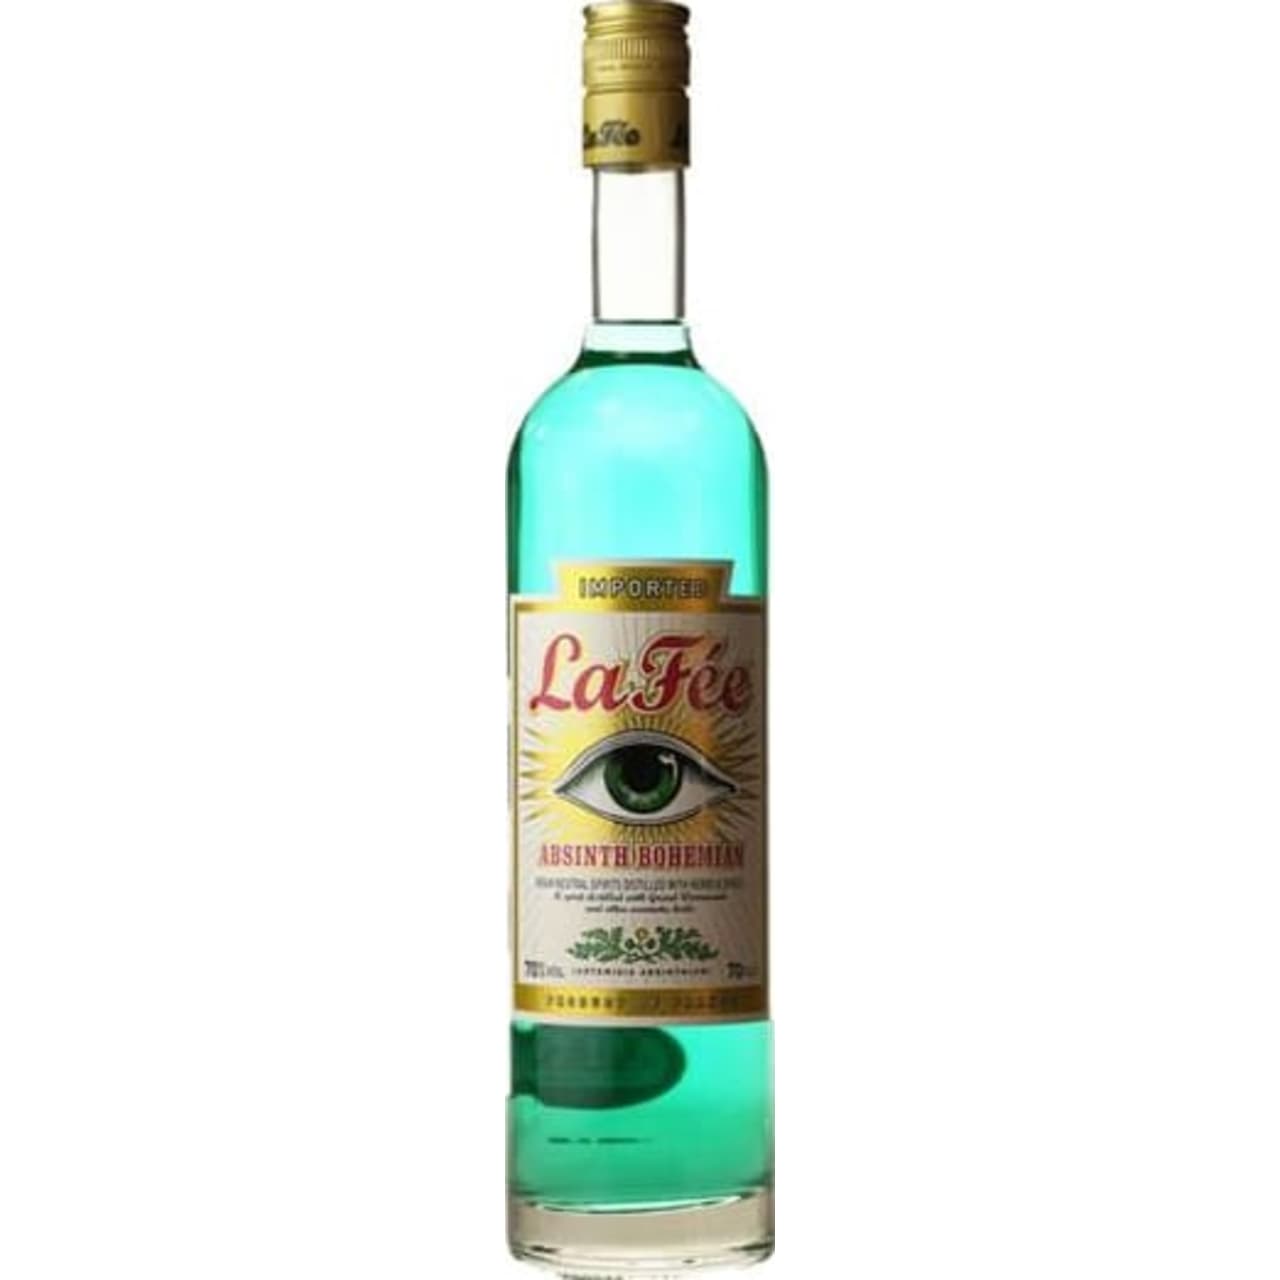 La Fée Bohemian is a more modern style of absinthe based on the spirit made in Bohemia back in the early 1990s. This is a more herbal style of absinthe, with less anise used in preparation.